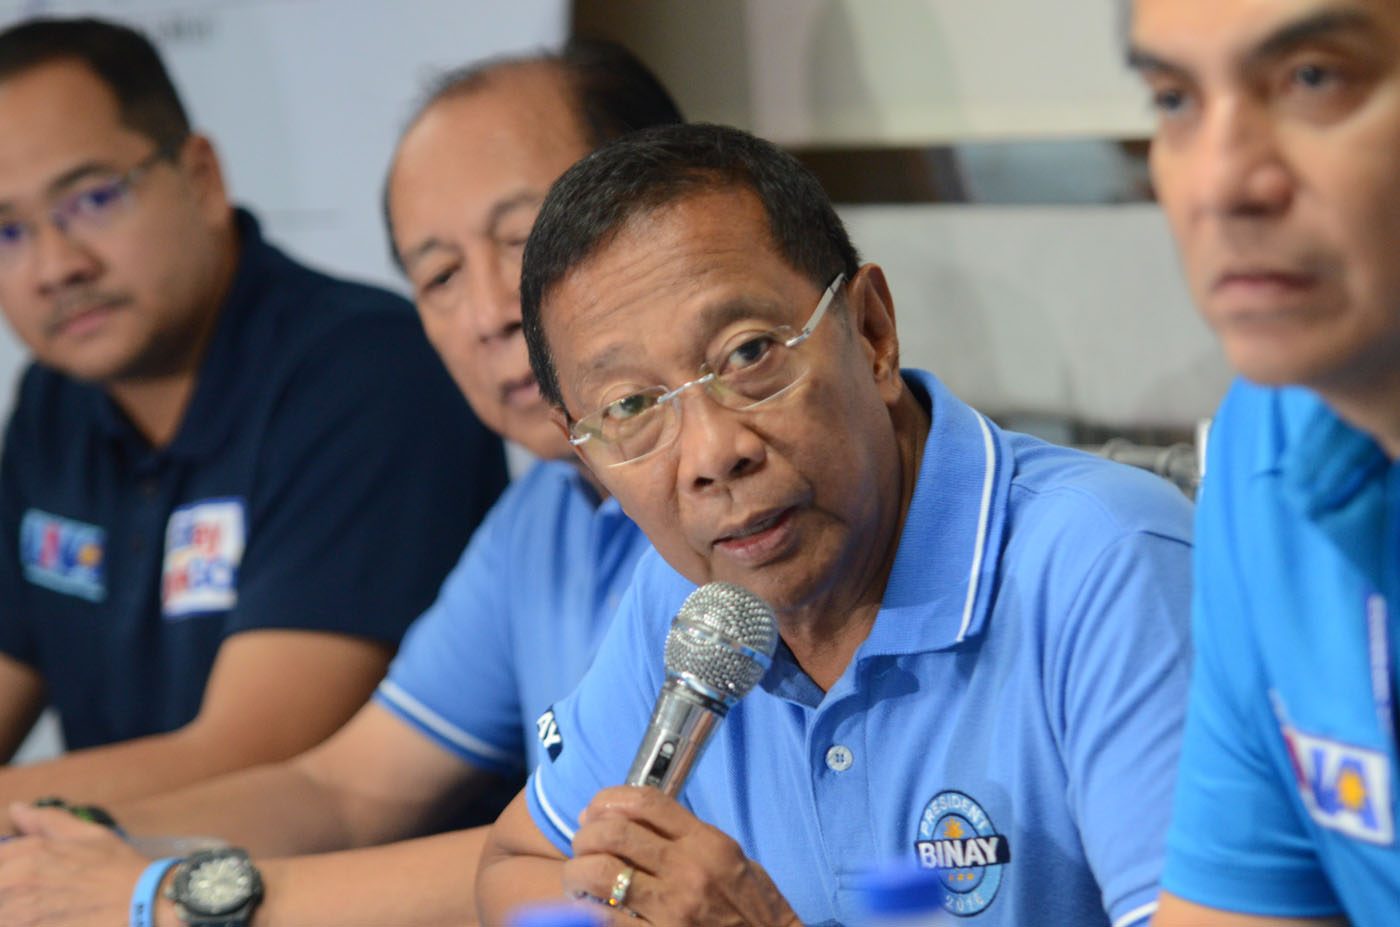 Binay to rivals: Open your bank accounts, show med certificates